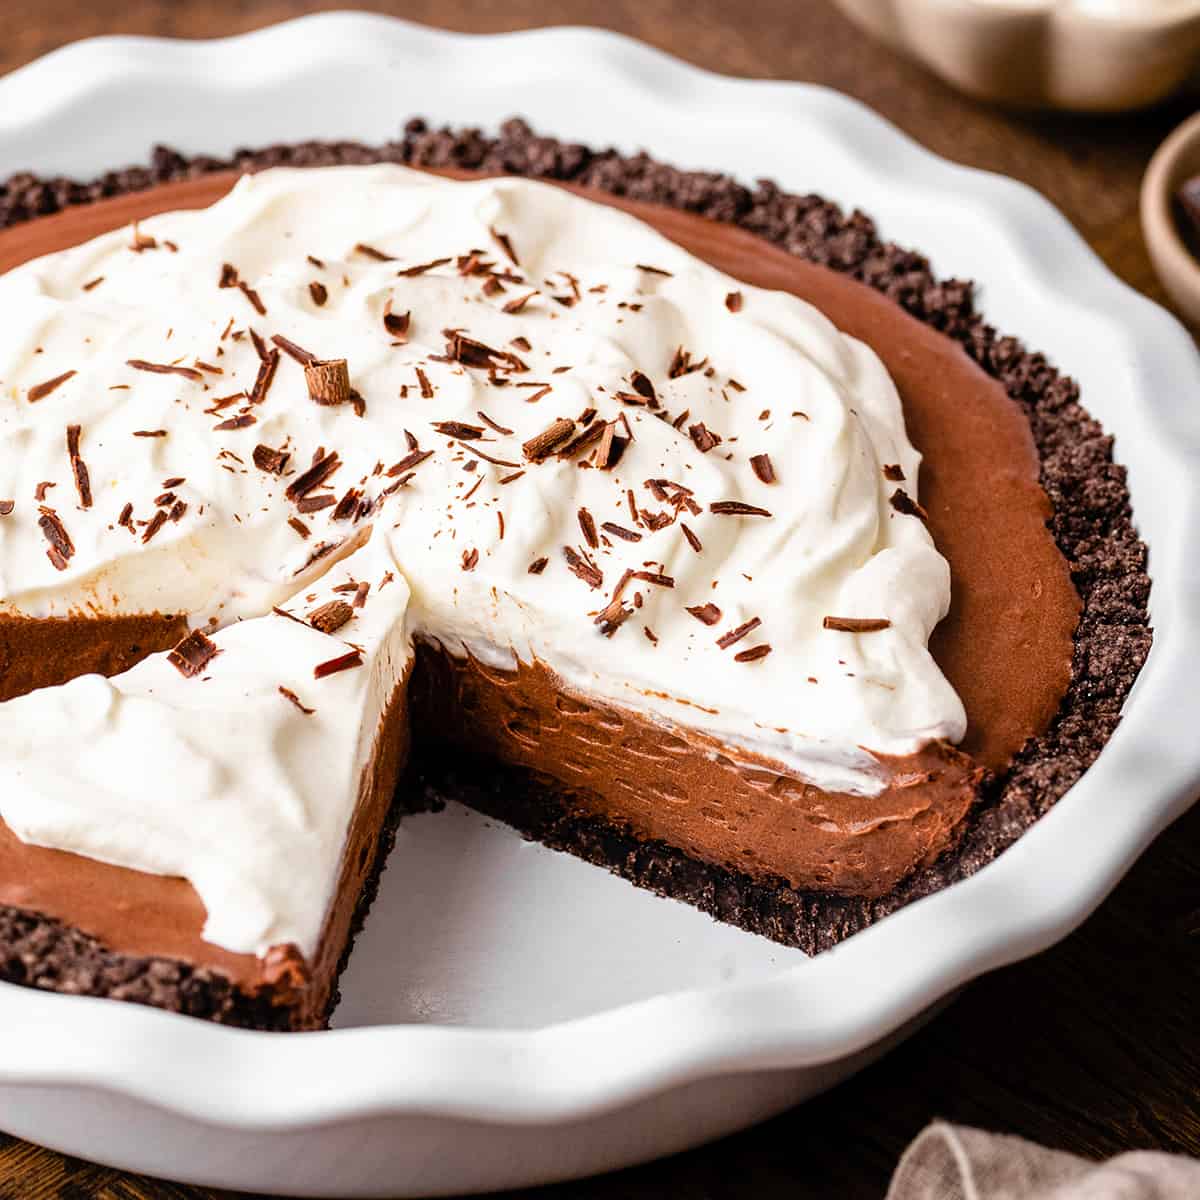 Oreo crust being used for a chocolate pudding pie